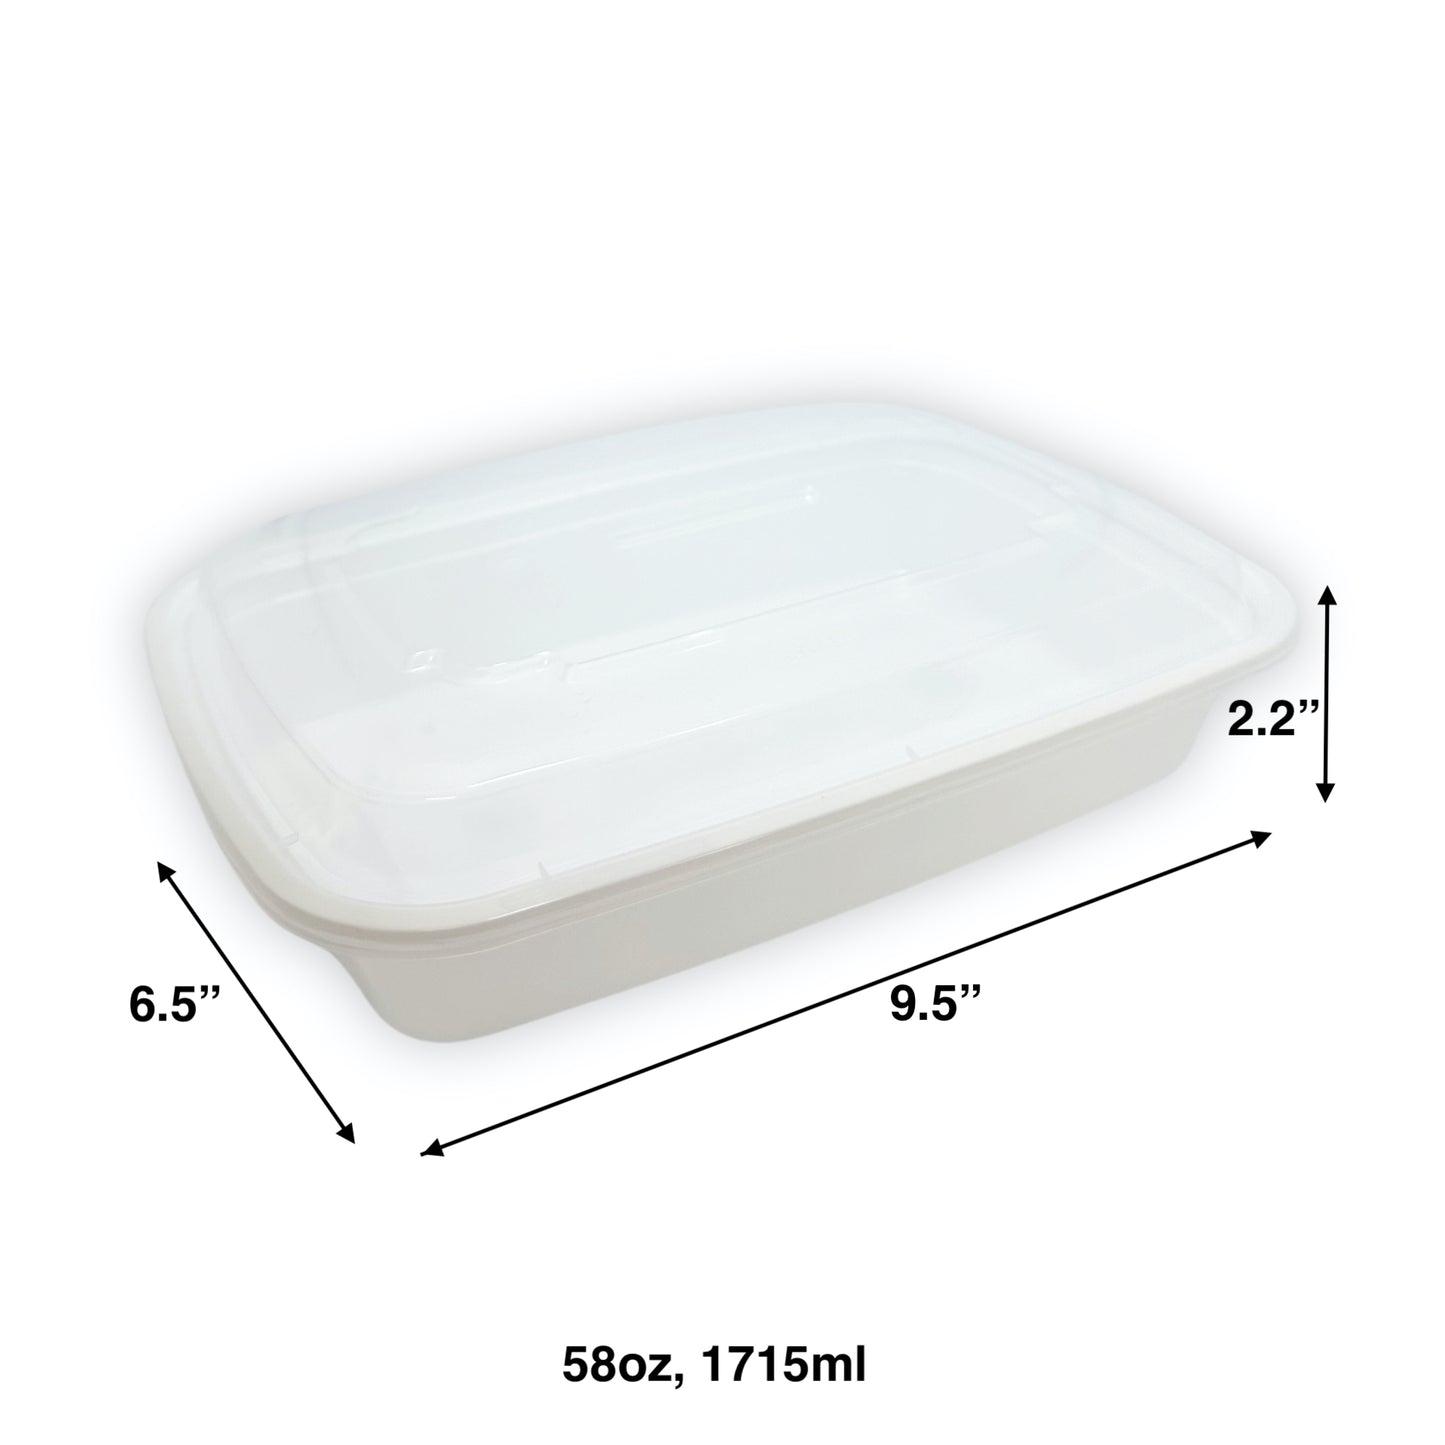 KIS-KY58G | 150sets 58oz, 1715ml White PP Rectangle Container with Clear Lids Combo; $0.404/set